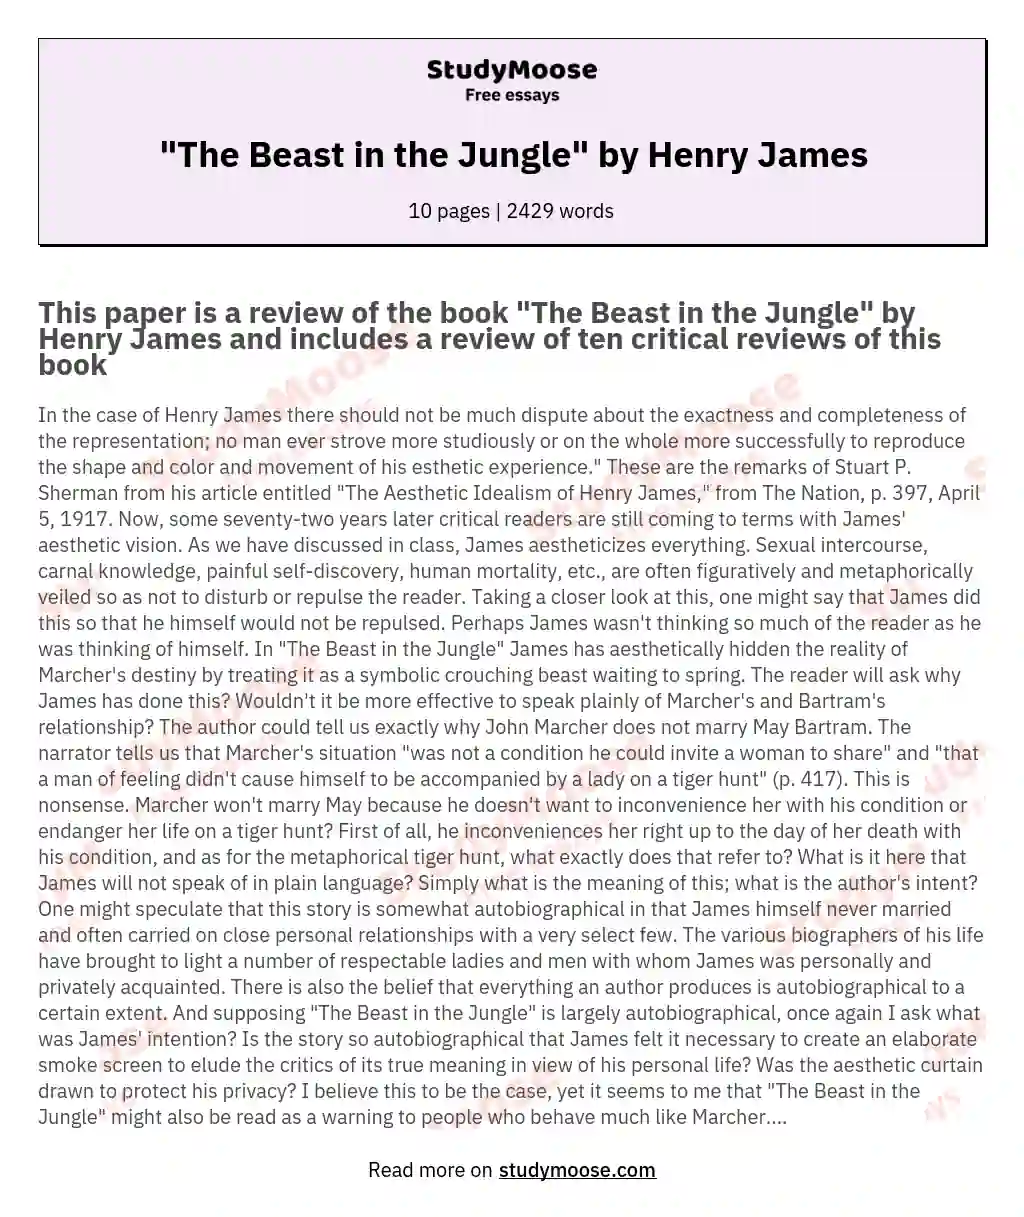 "The Beast in the Jungle" by Henry James